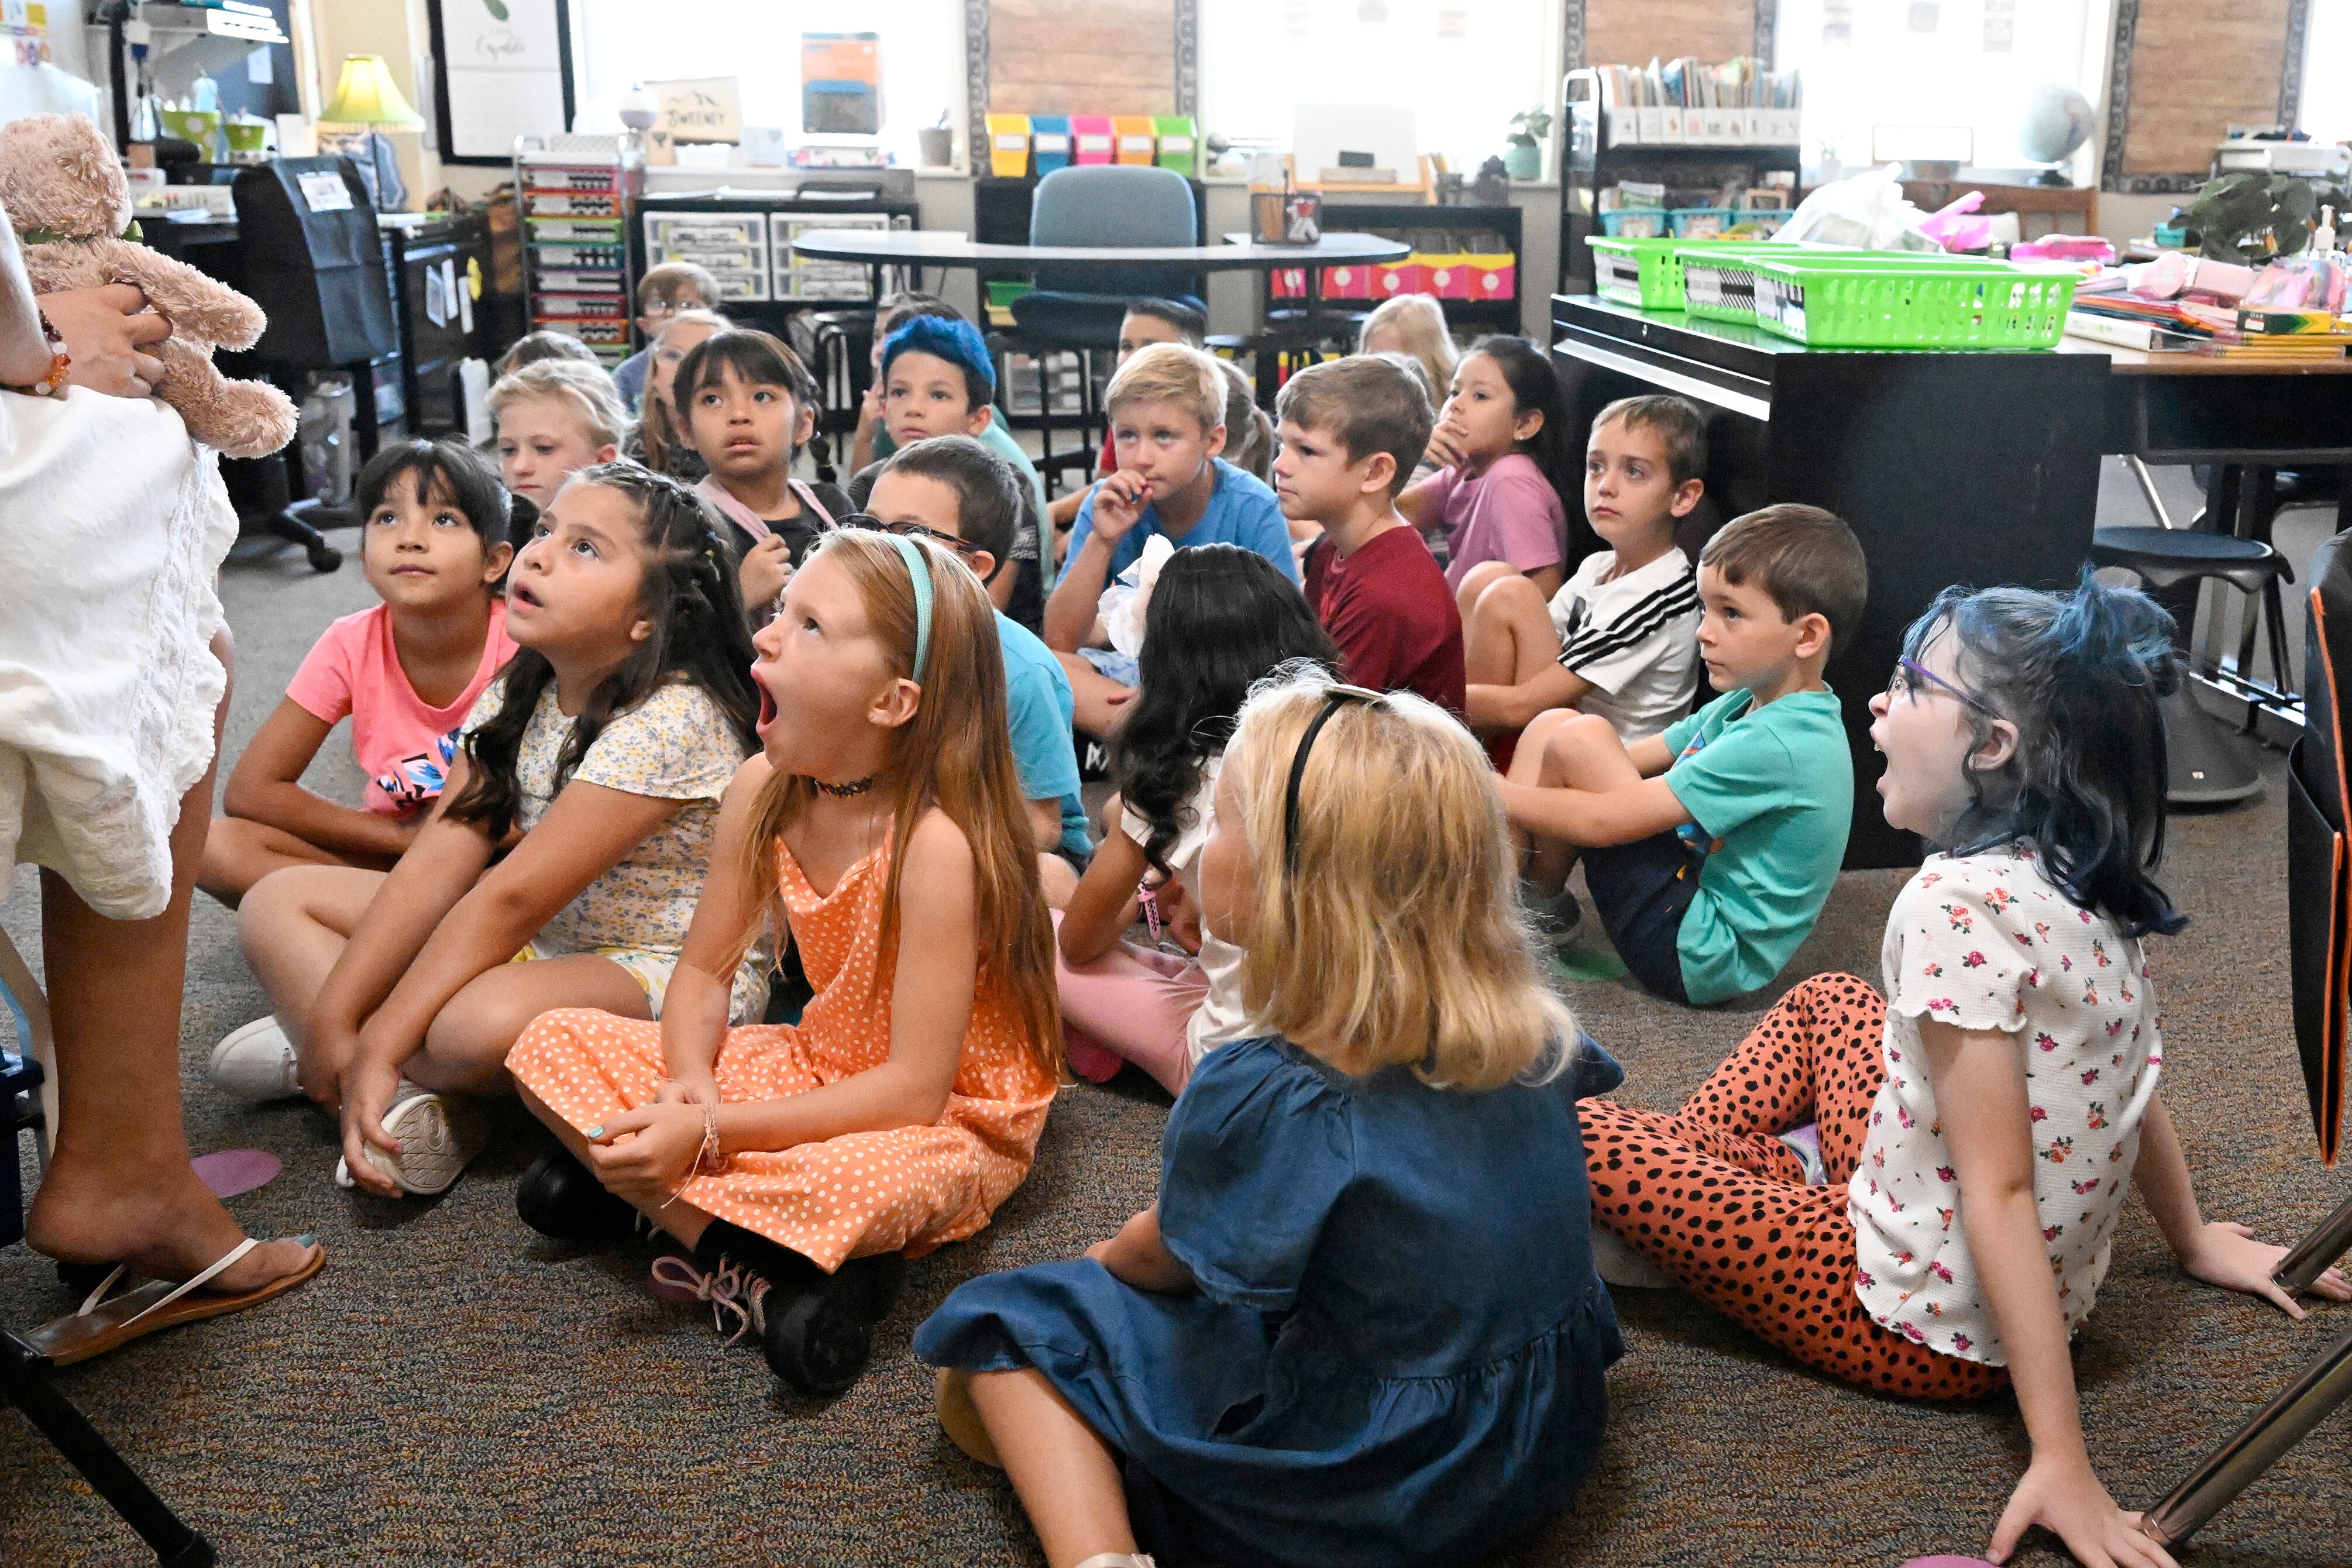 A classroom full of young students sit on the ground facing a teacher who is partially visible and desks in the background.